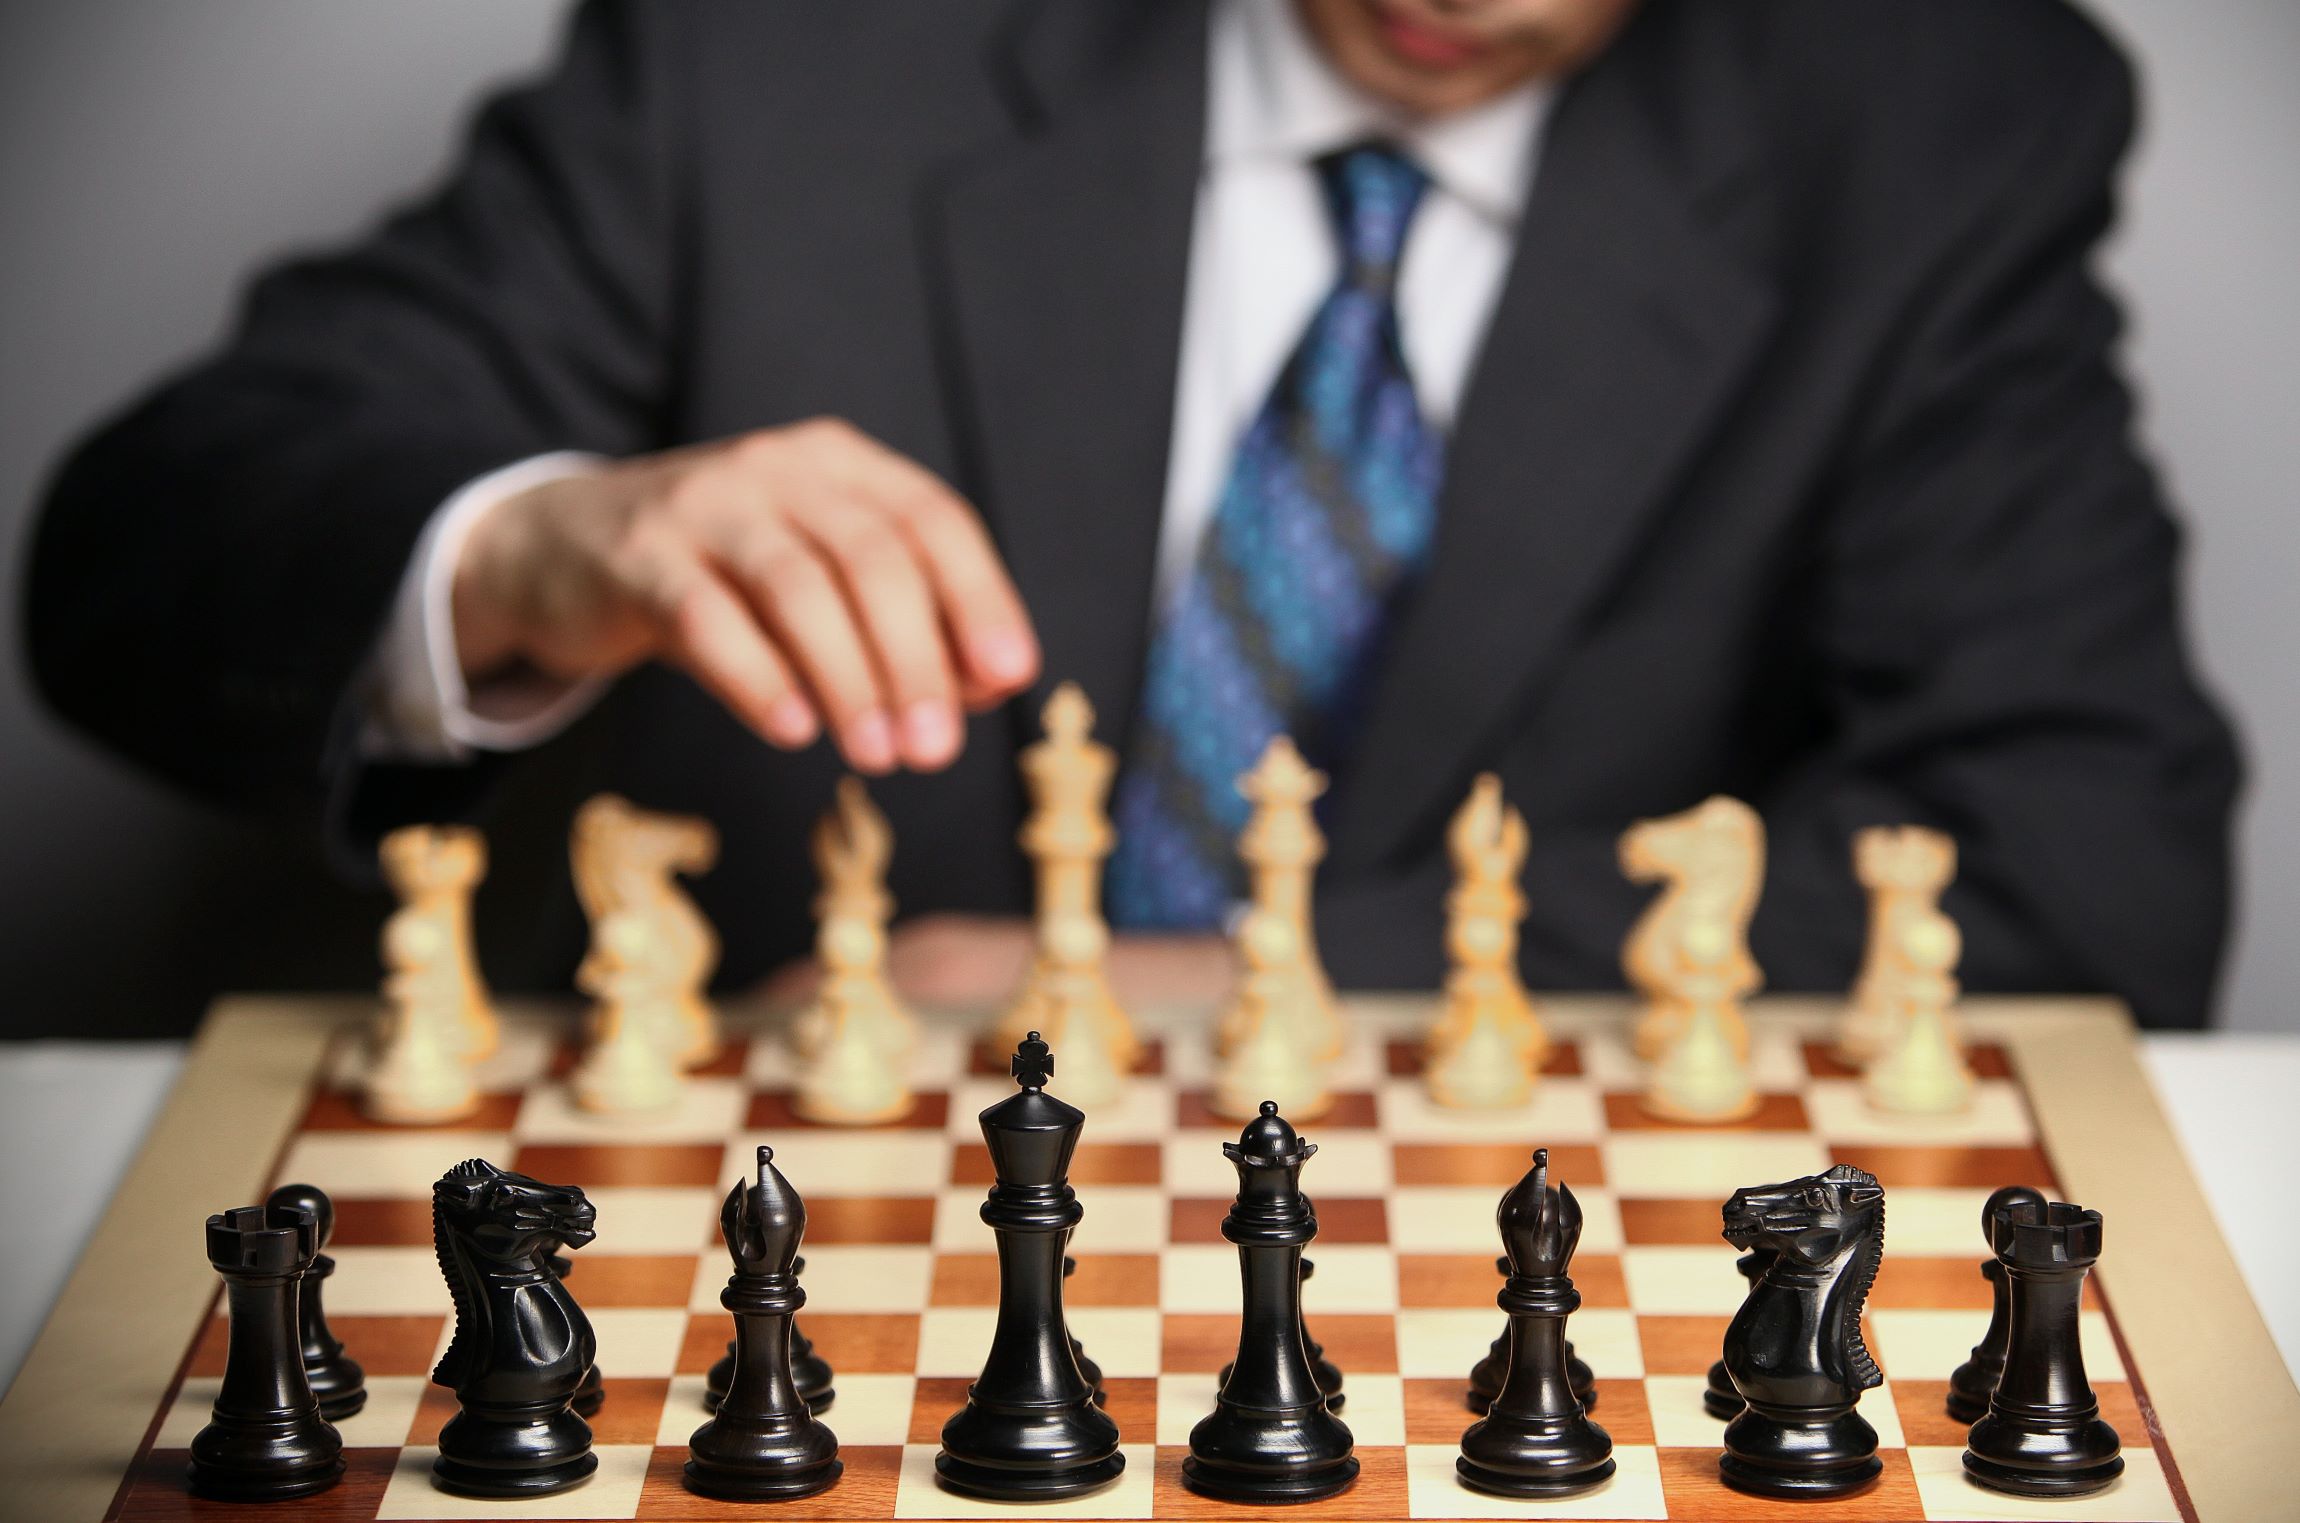 Chess as metaphore for career transition